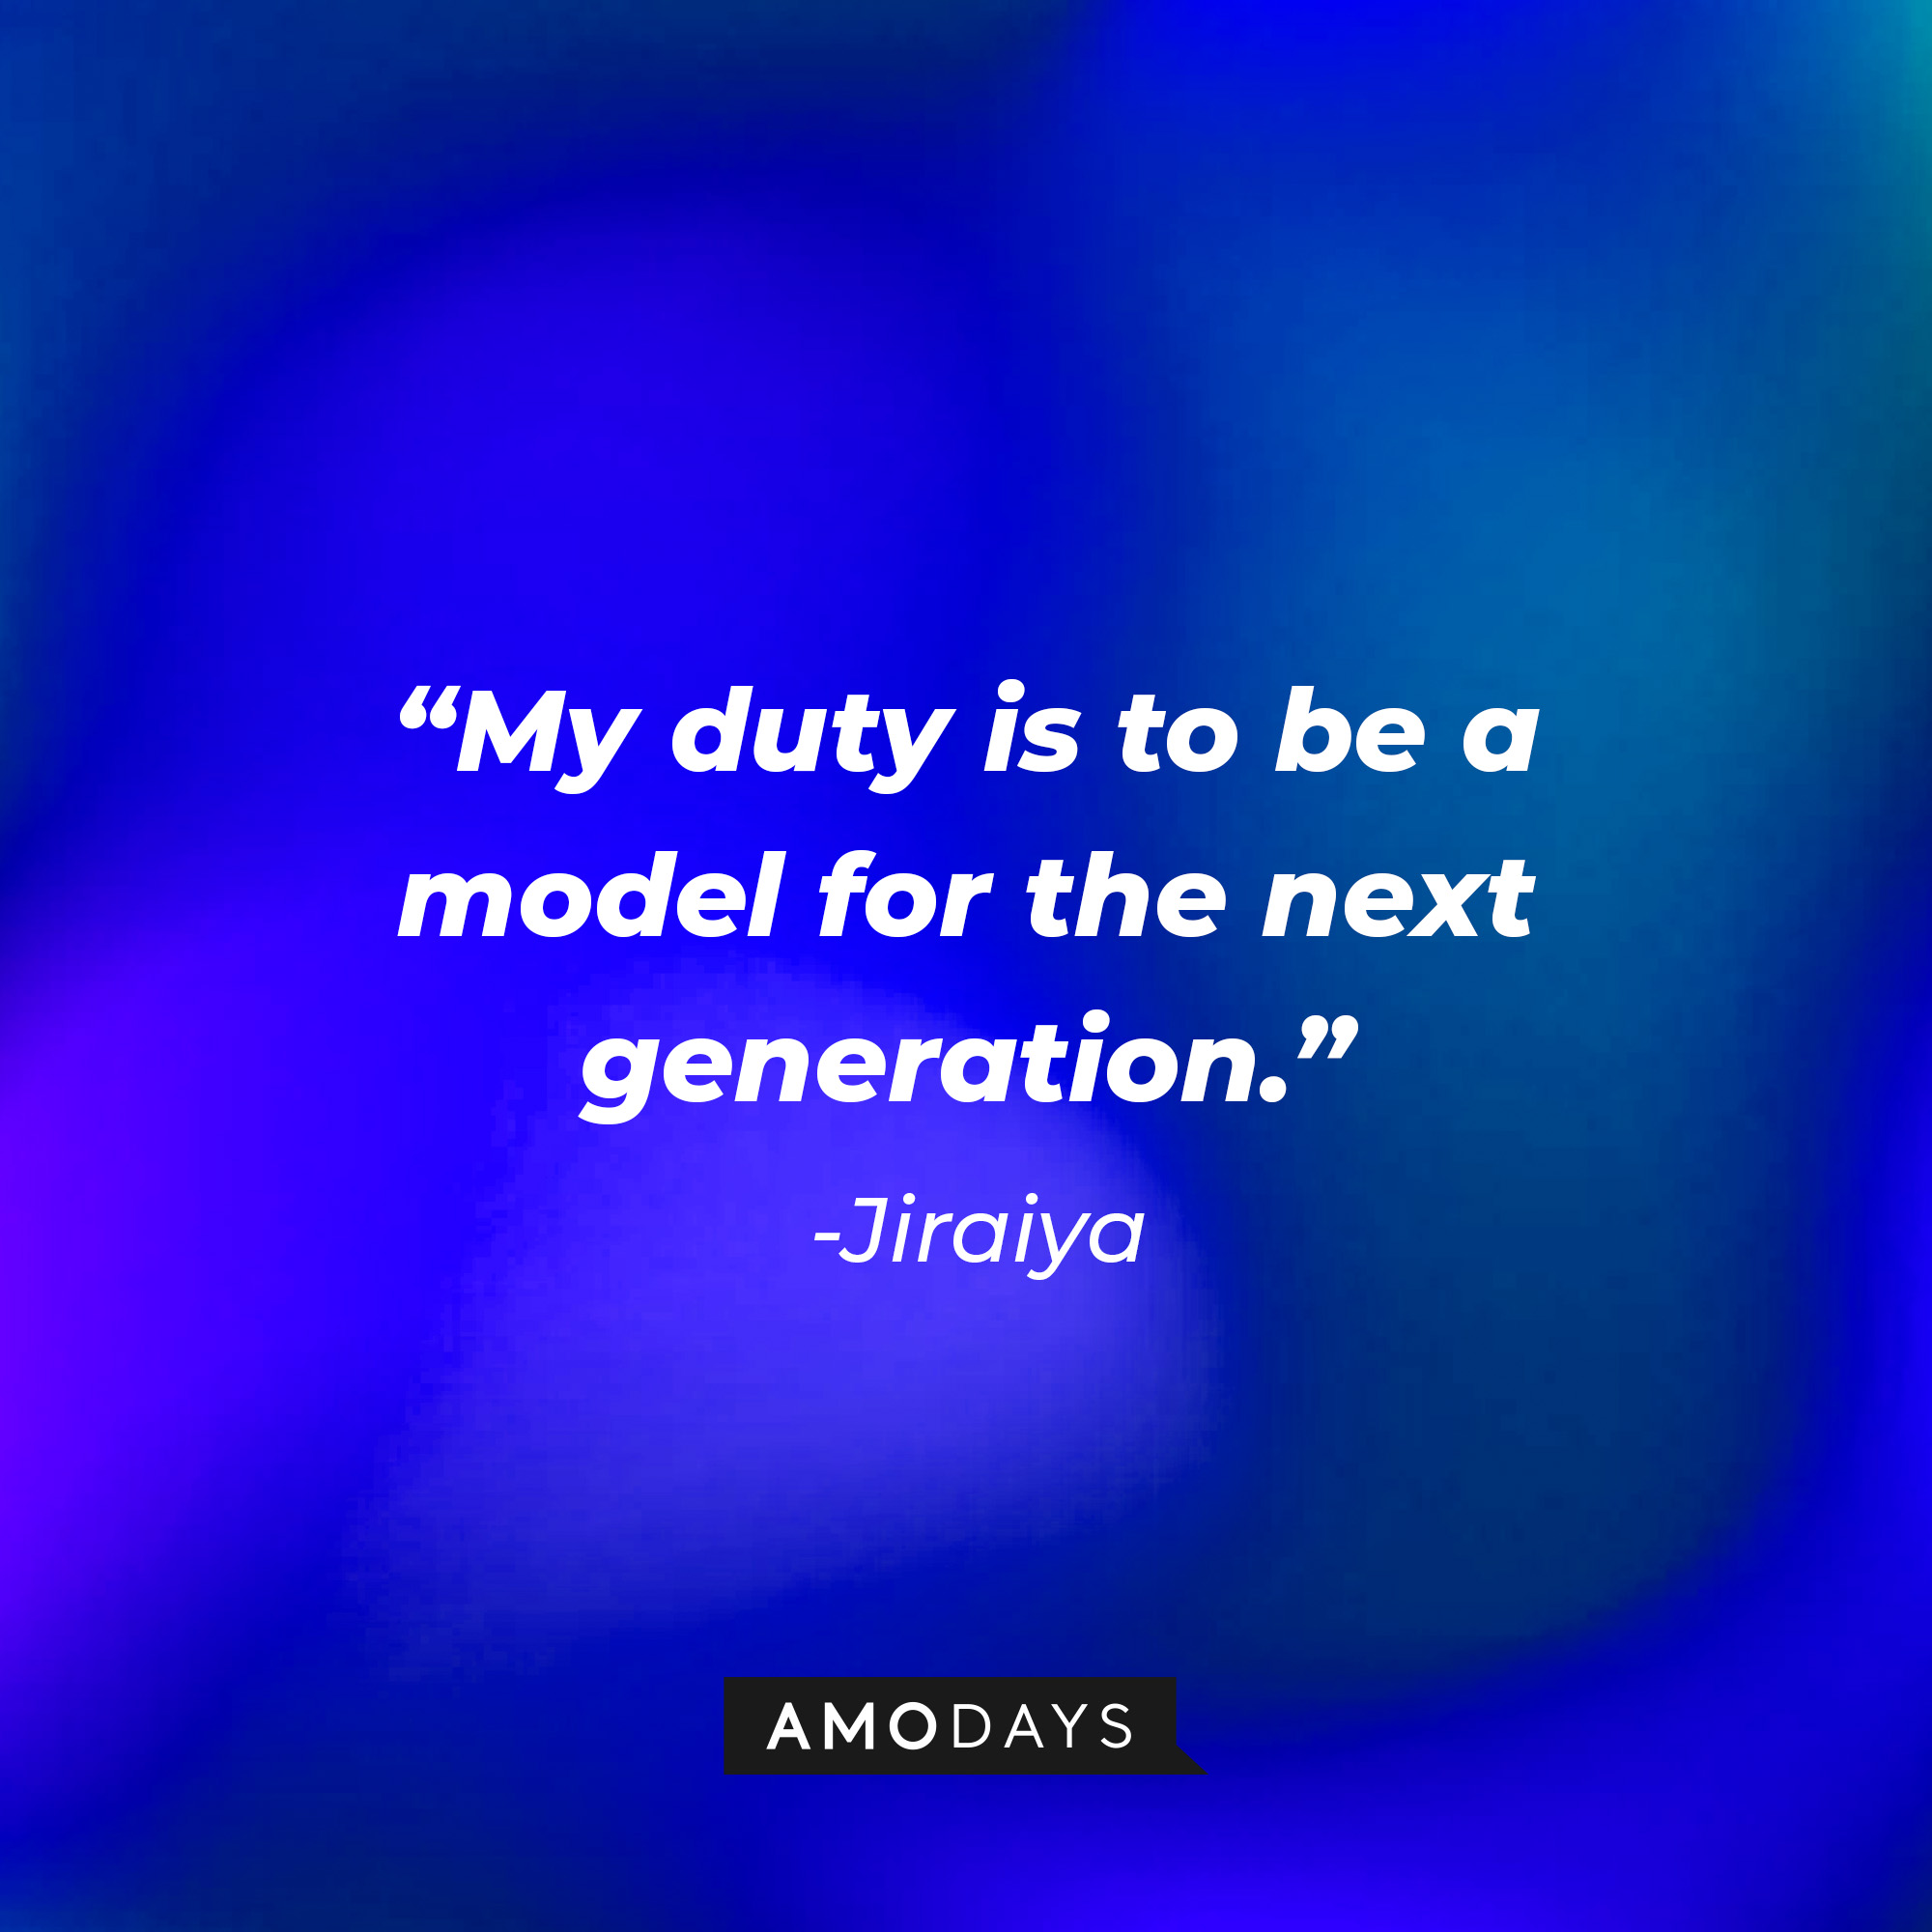 Jiraiya’s quote: “My duty is to be a model for the next generation.” │ Source: AmoDays